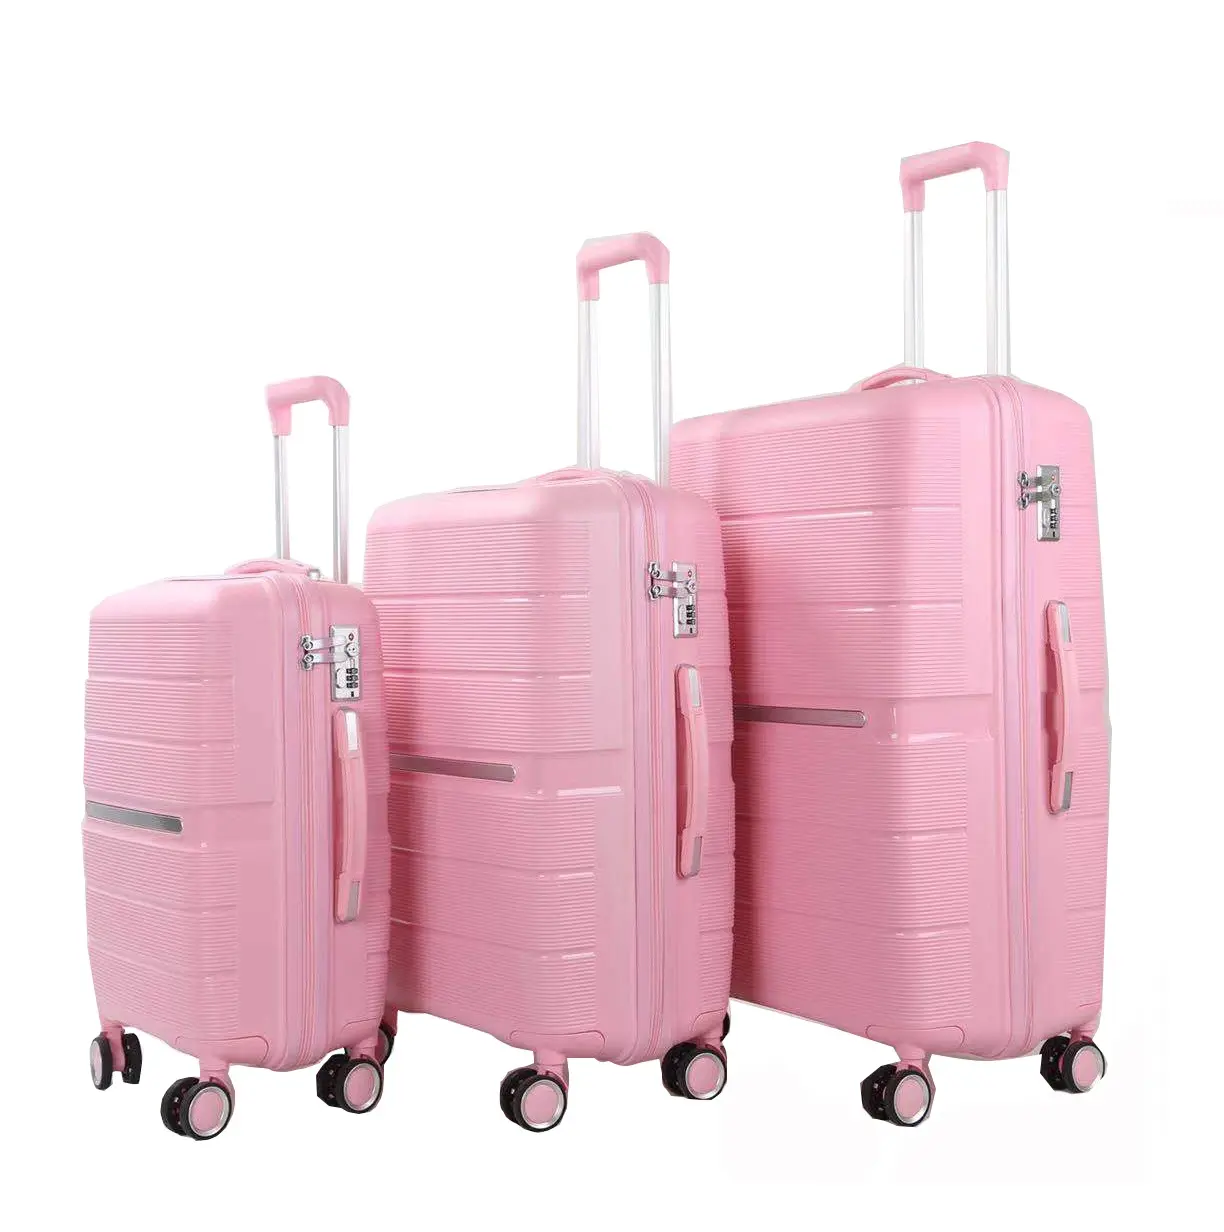 Wholesale price cheap trolley travelling suitcases set pp luggage with spinner wheels